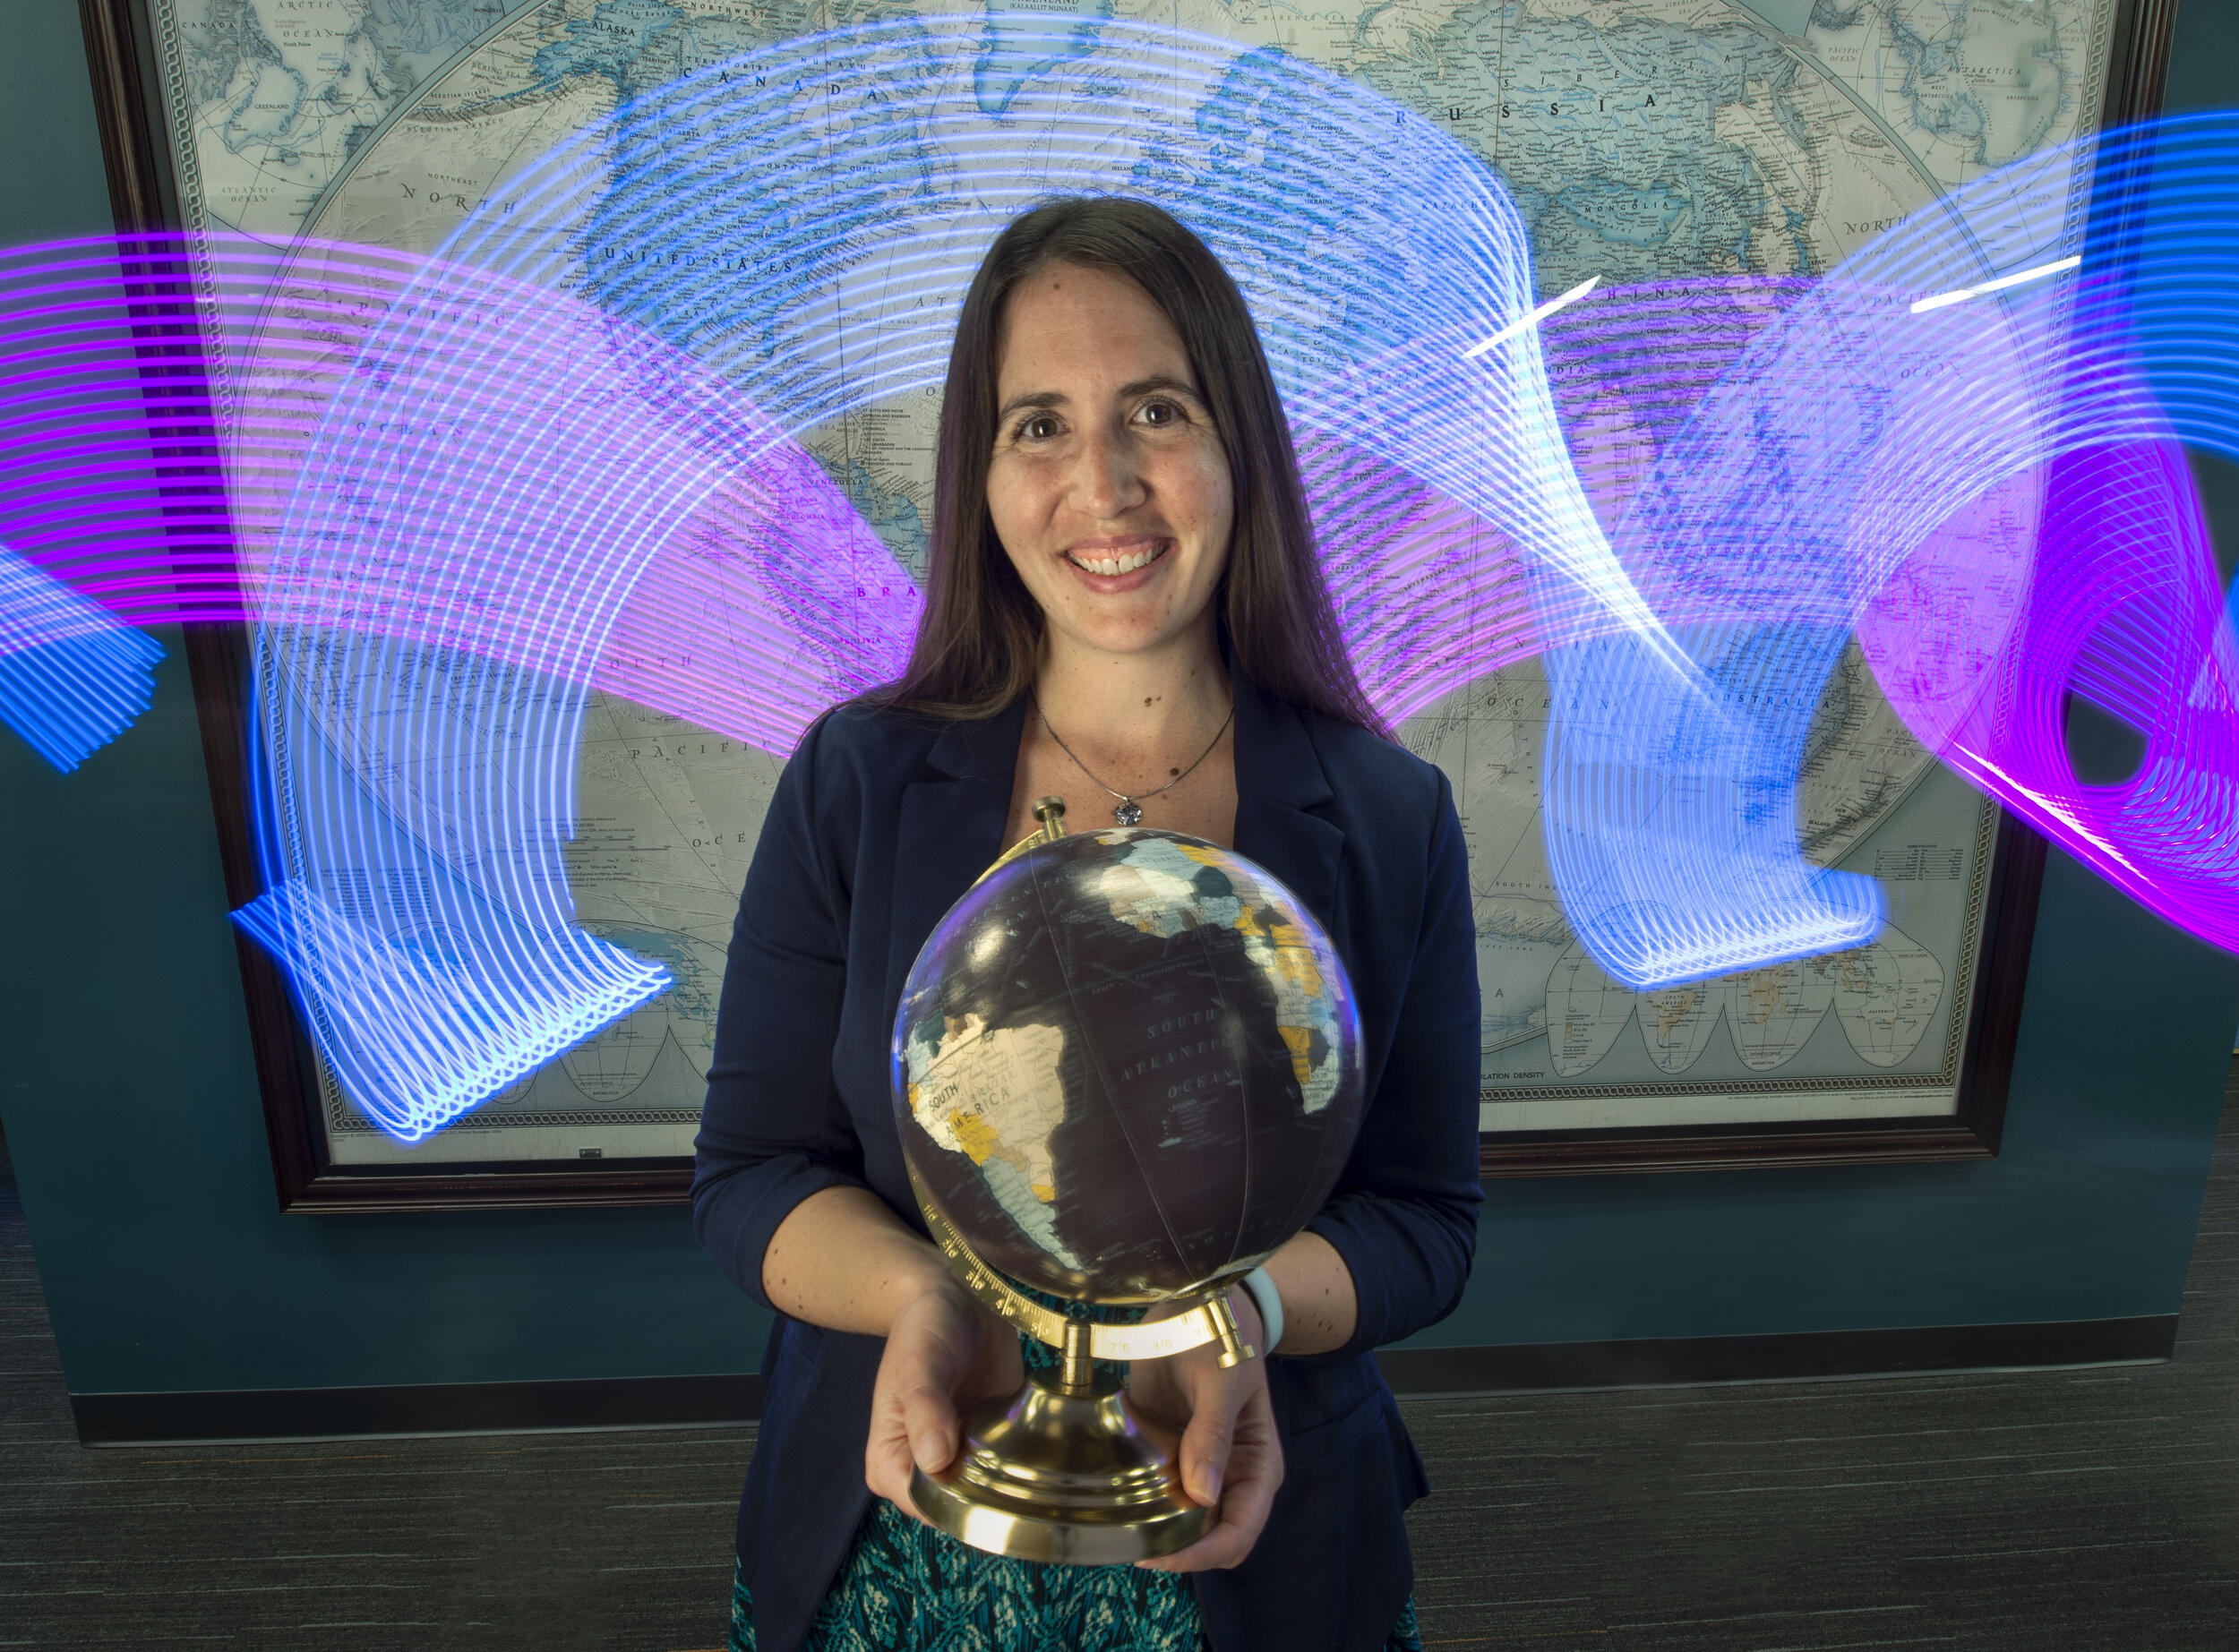 A photo of a woman holding a globe in front of a map